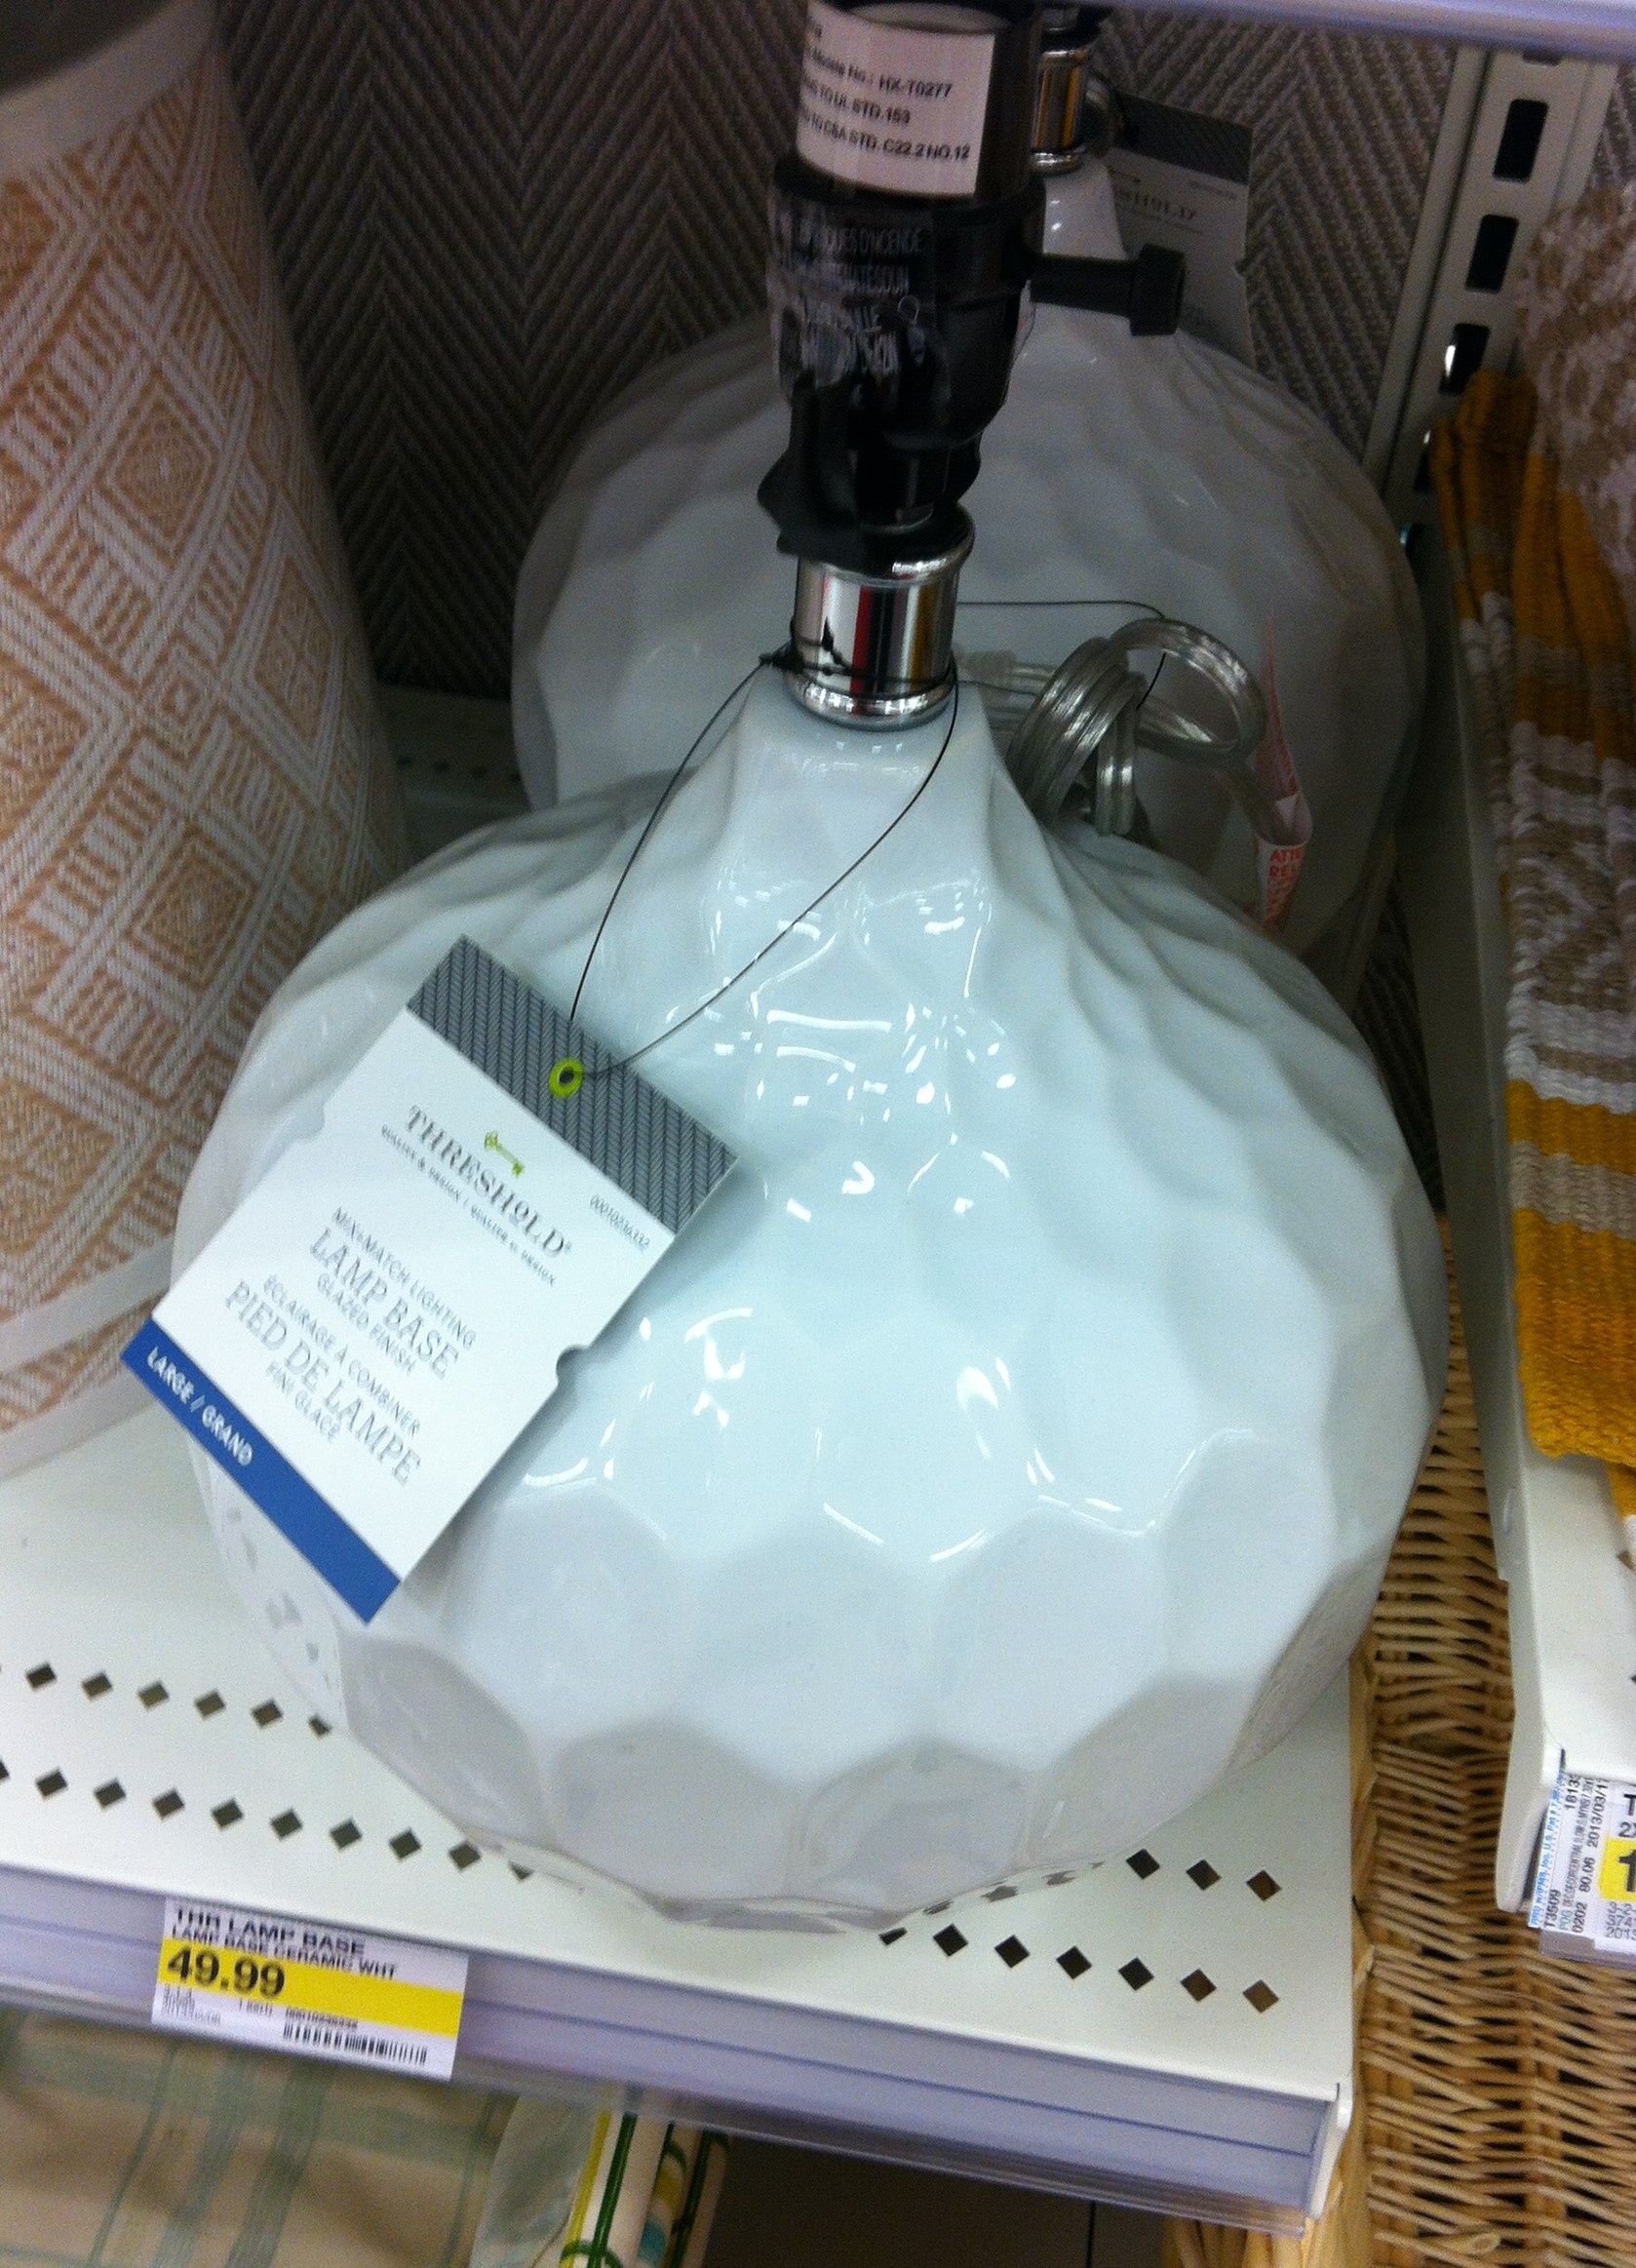 A white target beehive lamp.